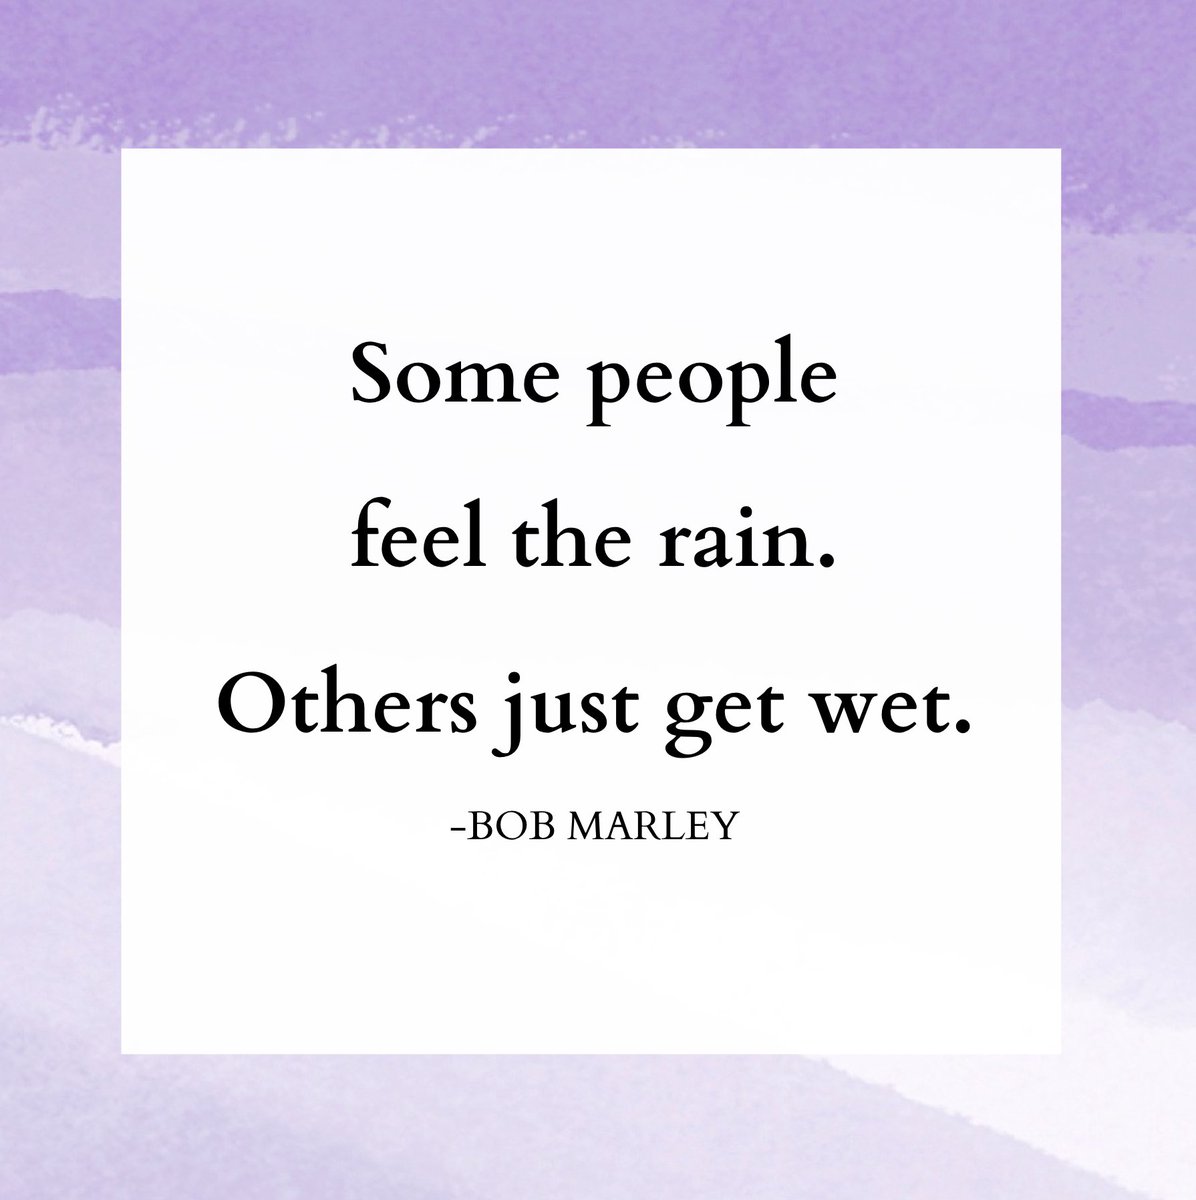 Do you ever notice yourself just going through the motions in life? What if you slowed down, even came to a stop and felt the rain? How might you show up differently for yourself, your family, or even at work? #theparentcoachinginstitute #parentcoach #selfcarejourney